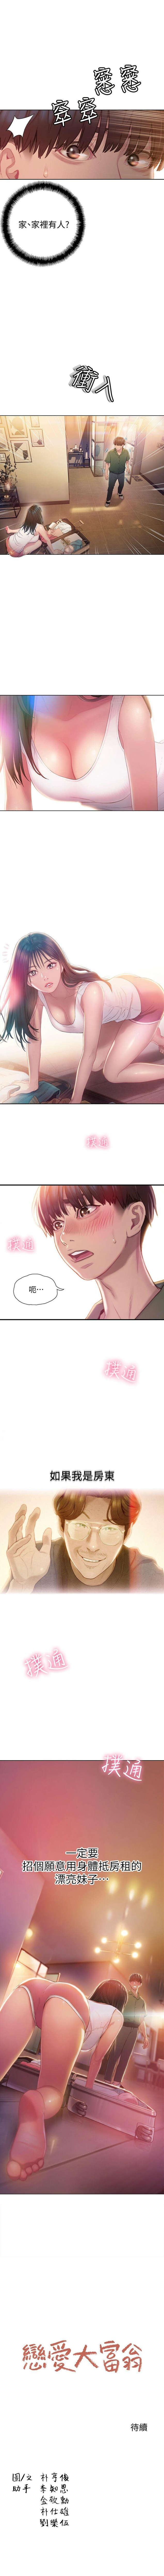 Cousin 戀愛大富翁 1-18 官方中文（休刊） Cunt - Page 10